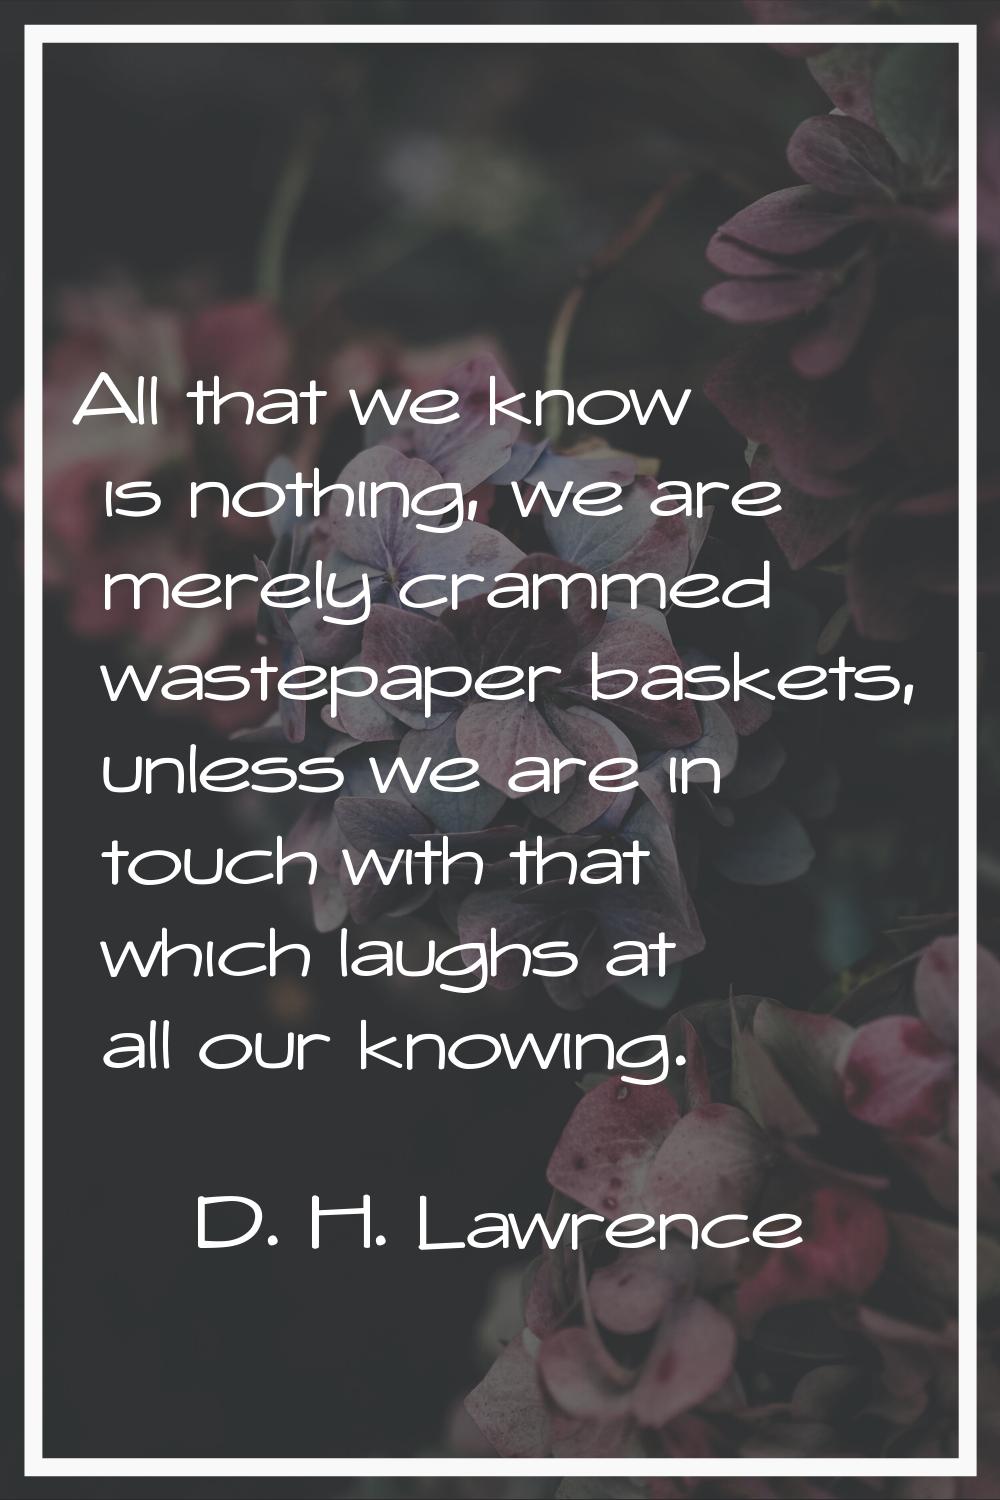 All that we know is nothing, we are merely crammed wastepaper baskets, unless we are in touch with 